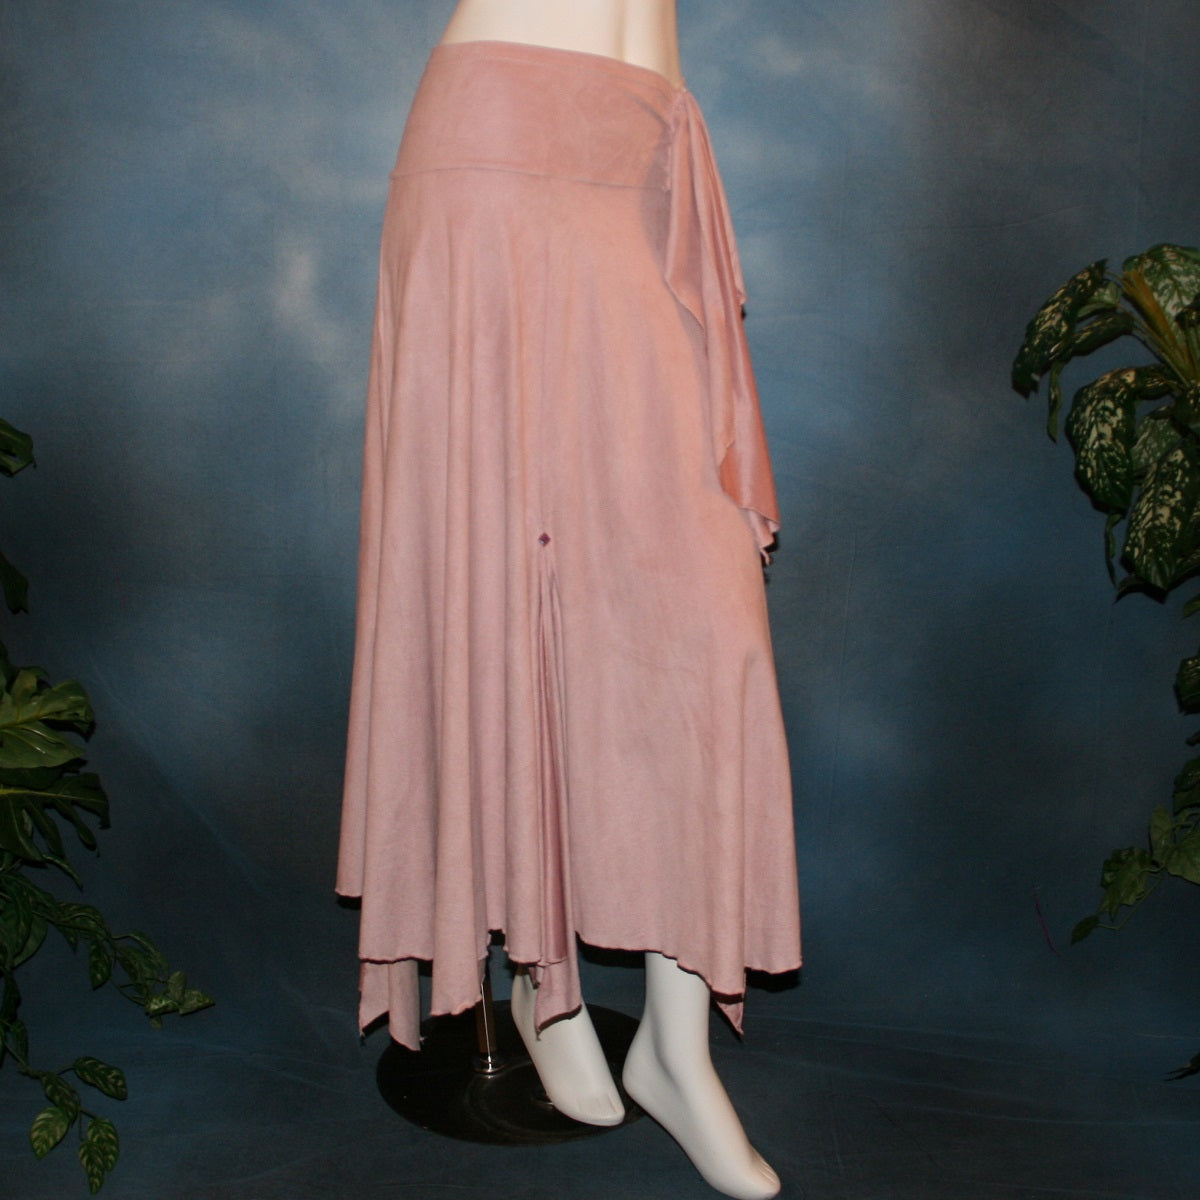 Lovely light rose dance skirt created of slightly stretchable suede cloth featuring a wide waist sash that flares out to several panels, with slits that have smaller floating panels with a rose colored acrylic gem at each.